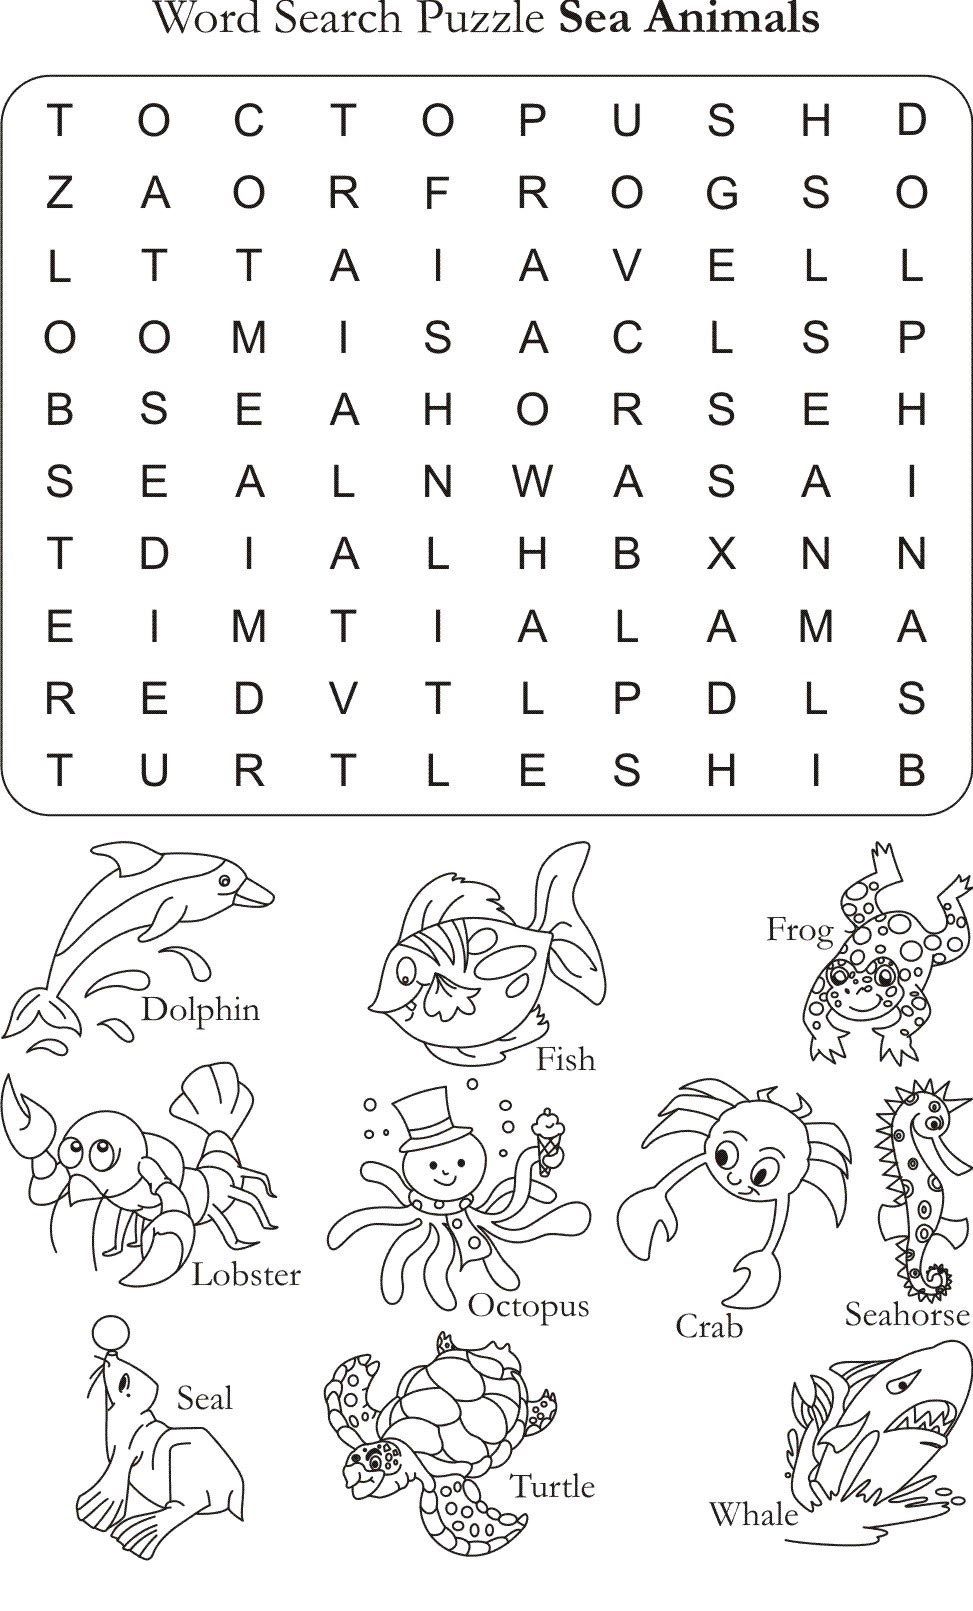 Word search puzzle sea animals download free word search puzzle sea animals for kids best coloring pages